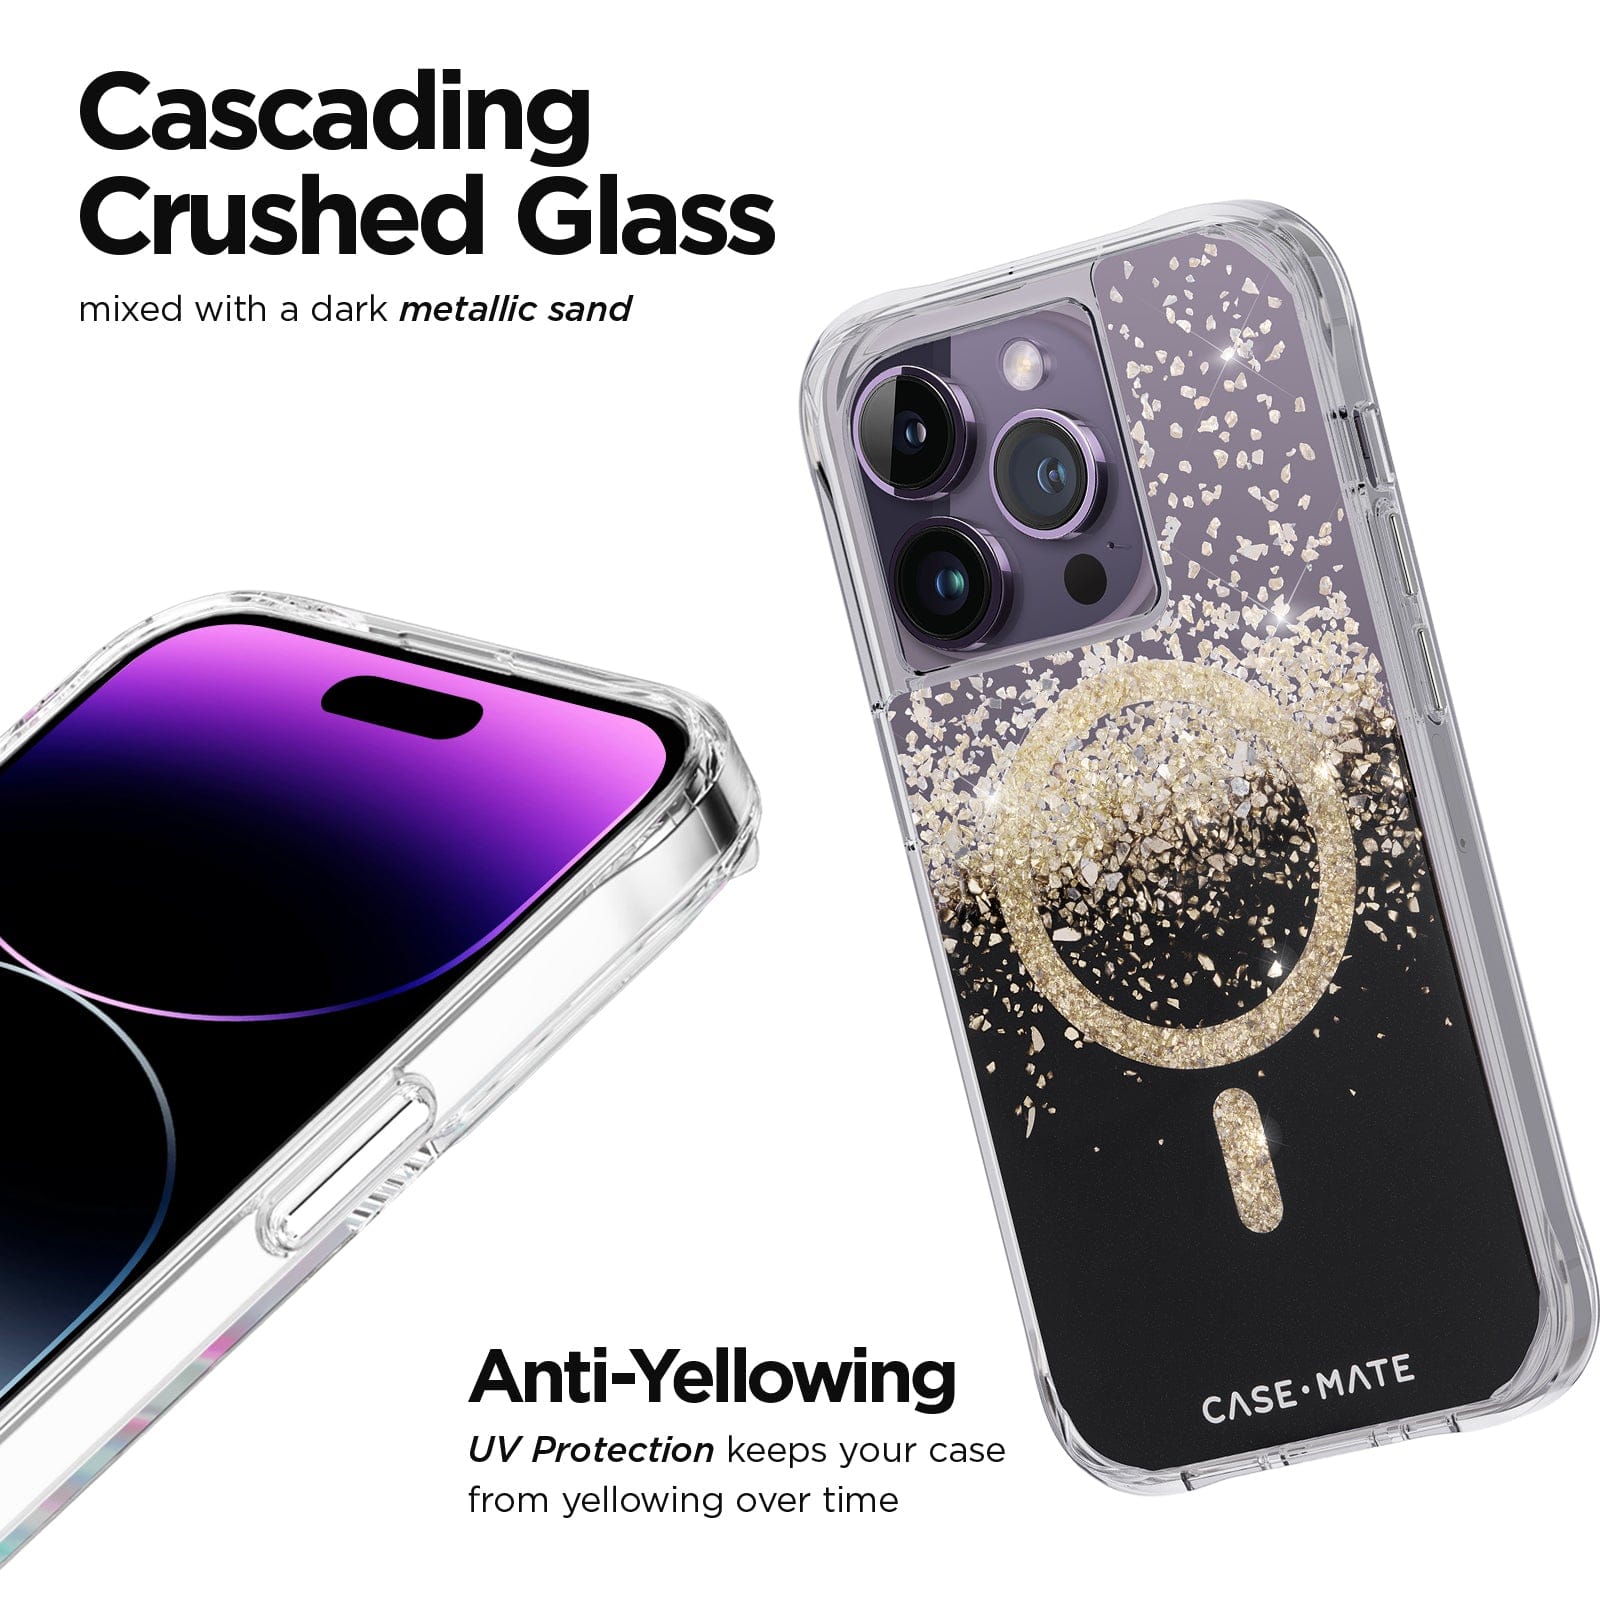 CASCADING CRUSHED GLASS MIXED WITH DARK METALLIC SAND/ ANTI-YELLOWING UV PROTECTION KEEPS YOUR CASE FROM YELLOWING OVER TIME. 